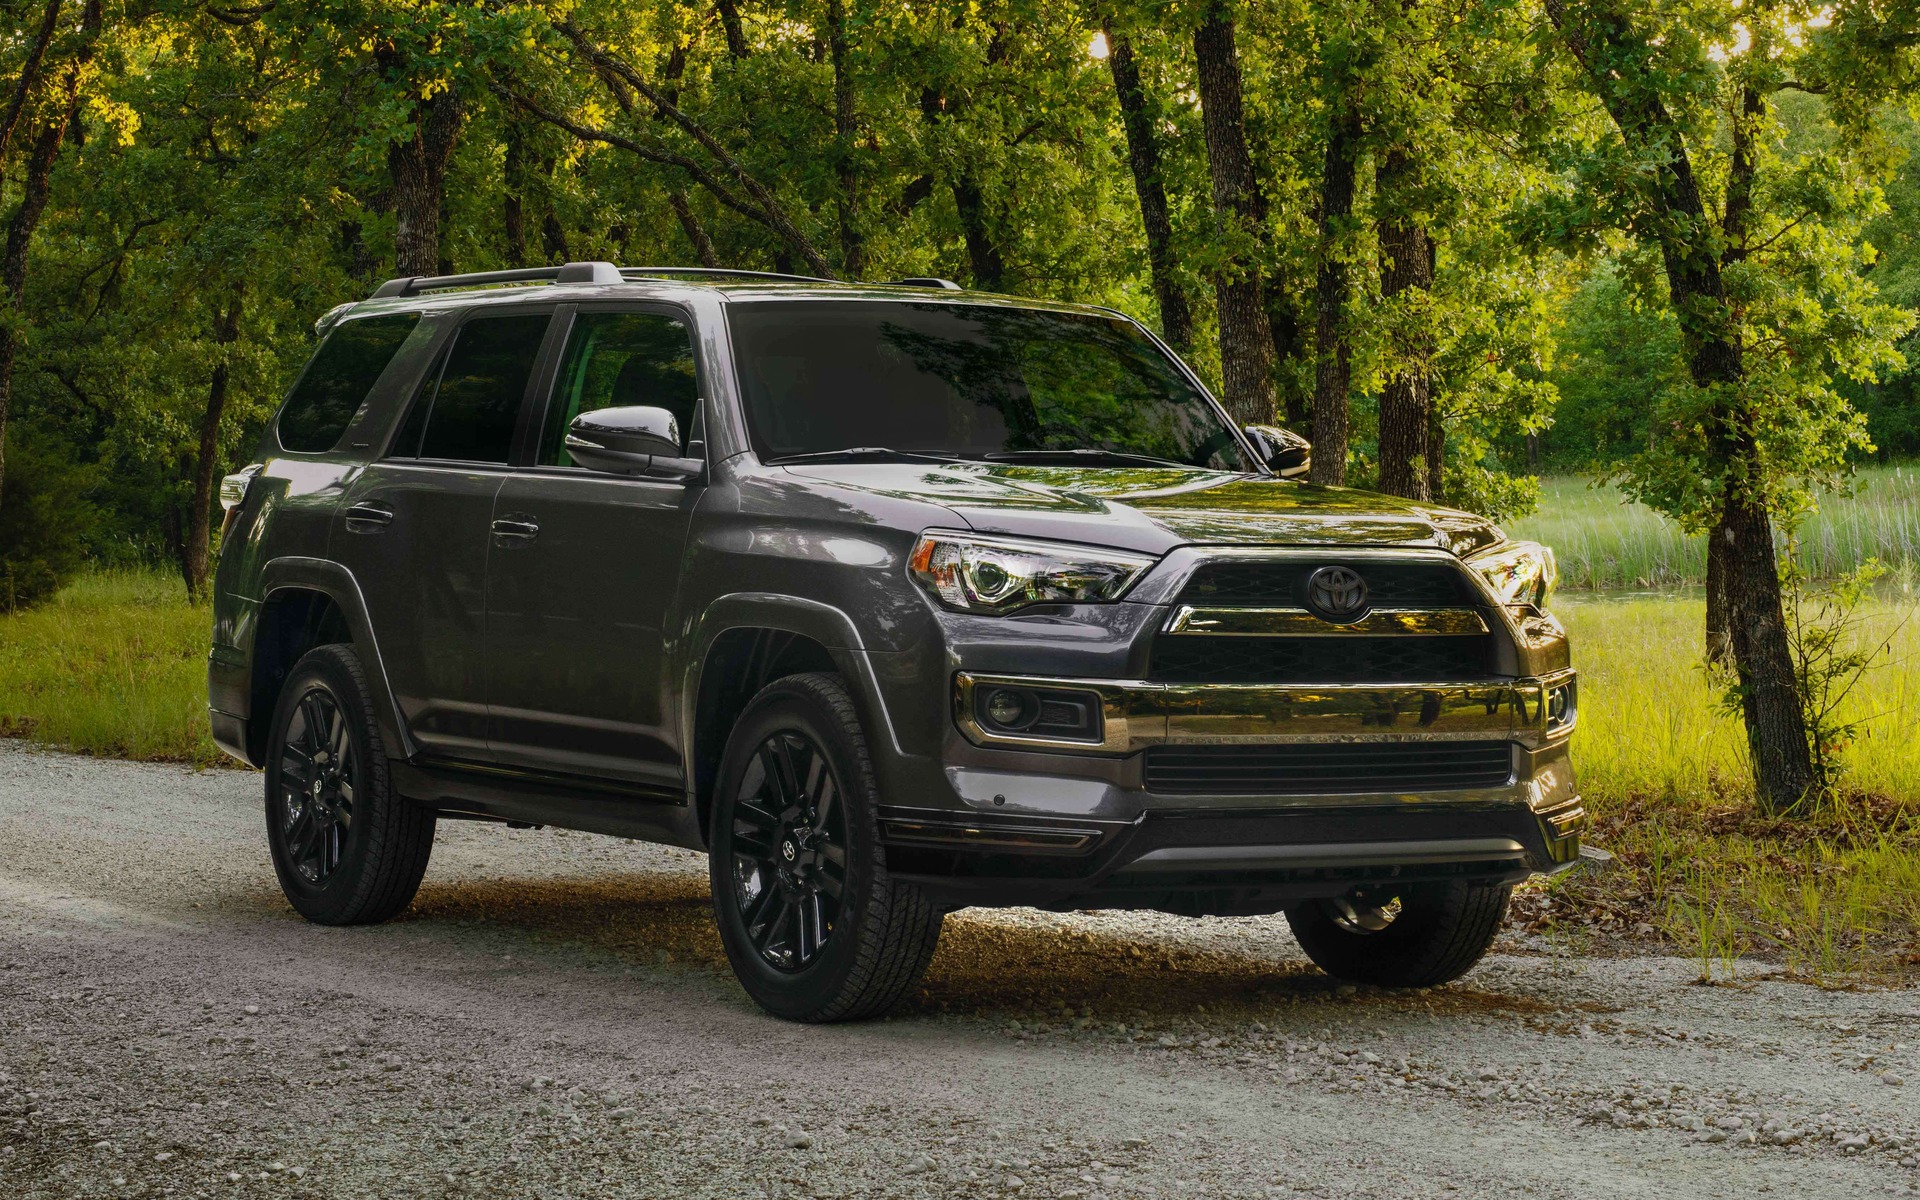 2019 toyota 4runner specifications the car guide 2019 toyota 4runner specifications